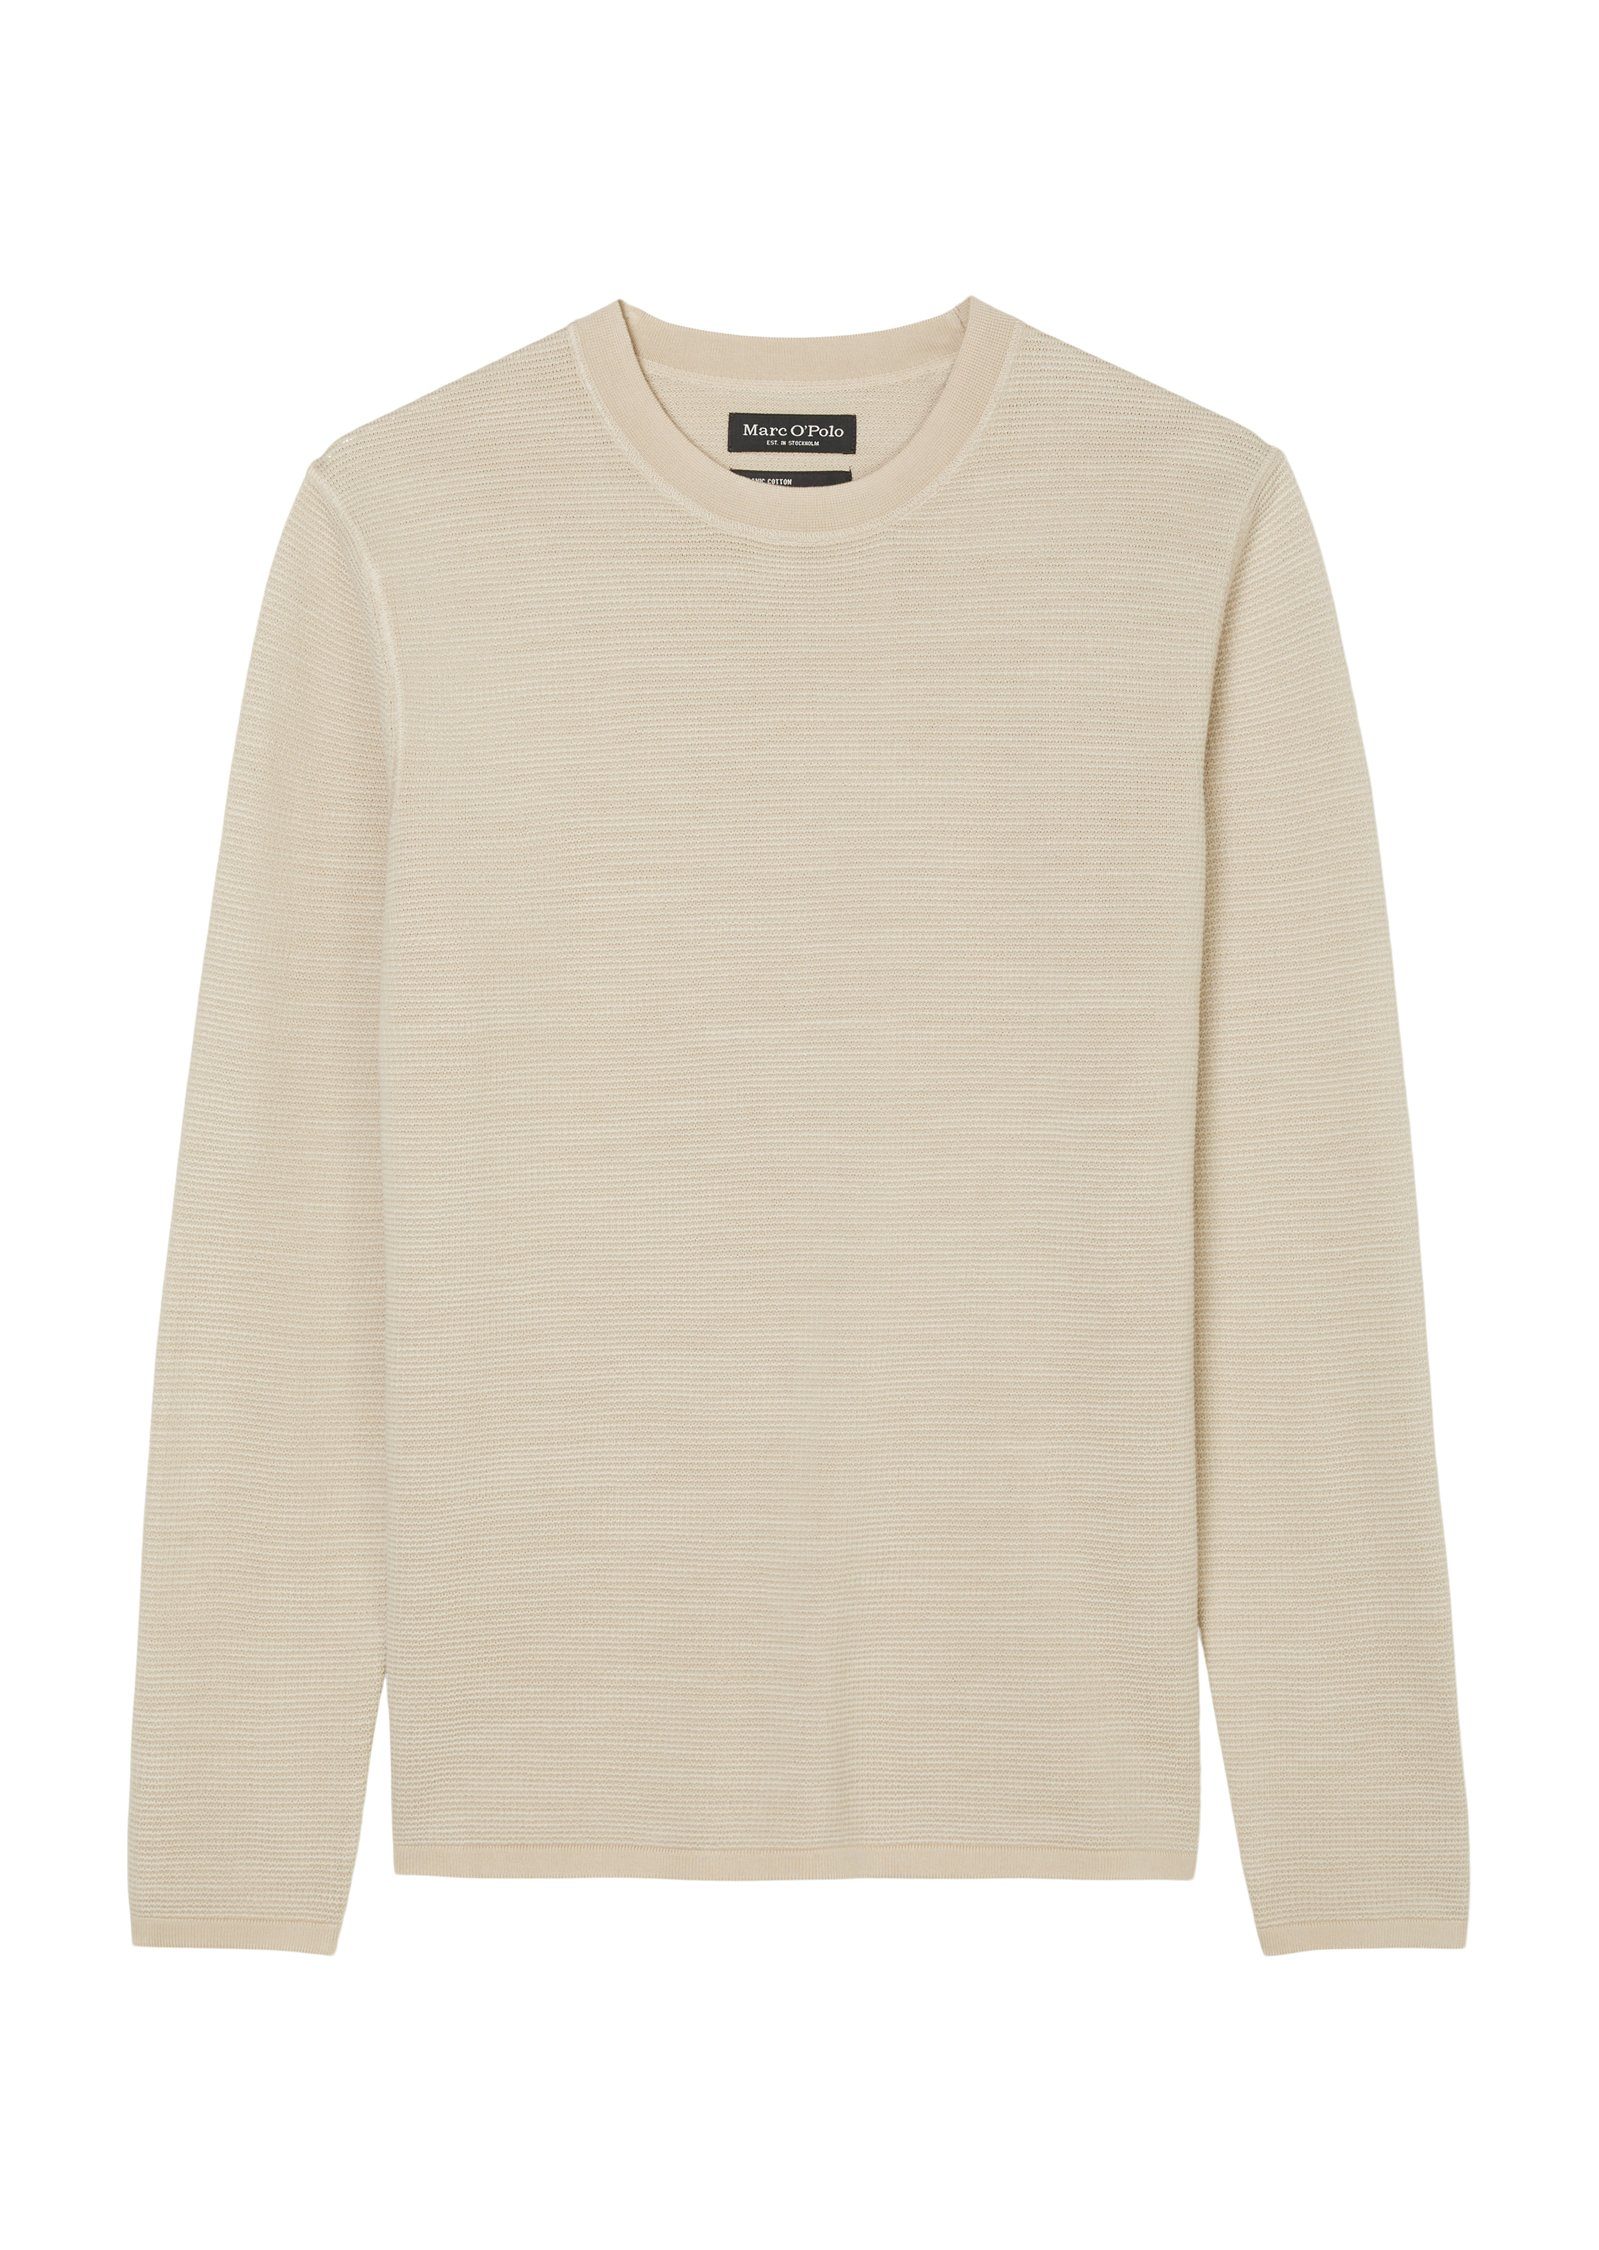 Marc O'Polo Sweatshirt Pullover, crew neck, with structure